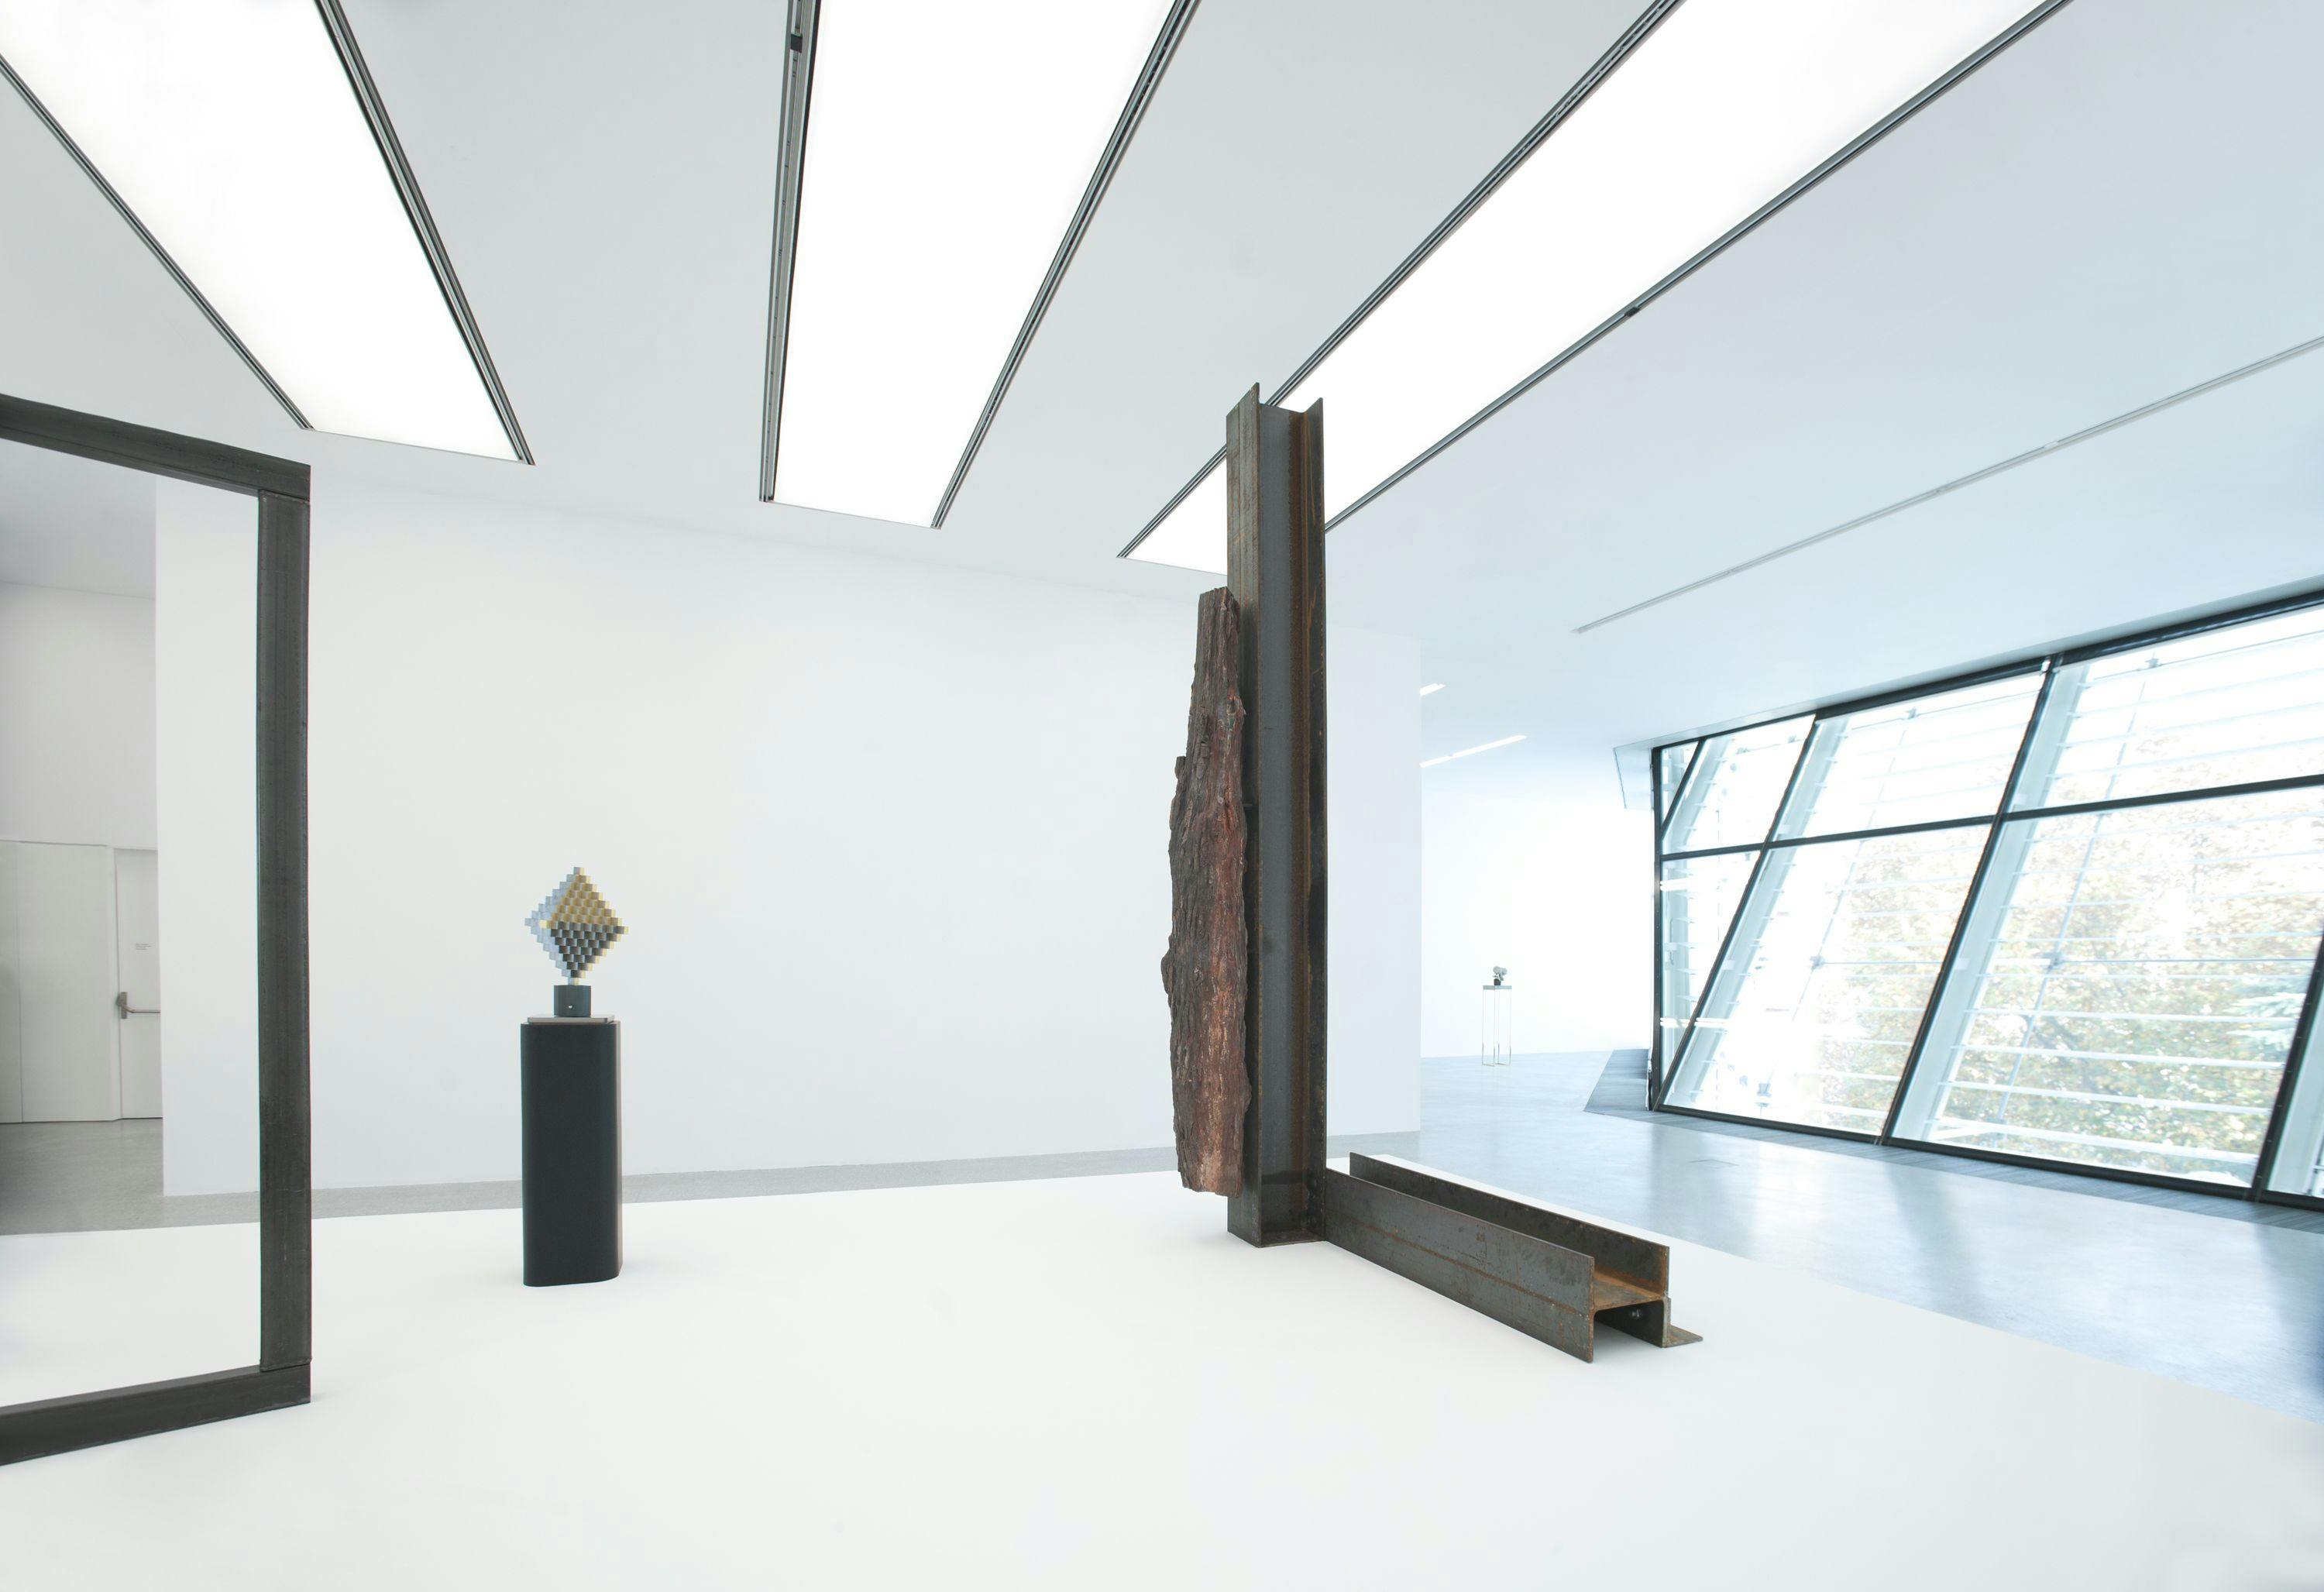 Installation view of the exhibition titled Carol Bove and Carlo Scarpa at Museion in Bolzano, Italy, dated 2014.